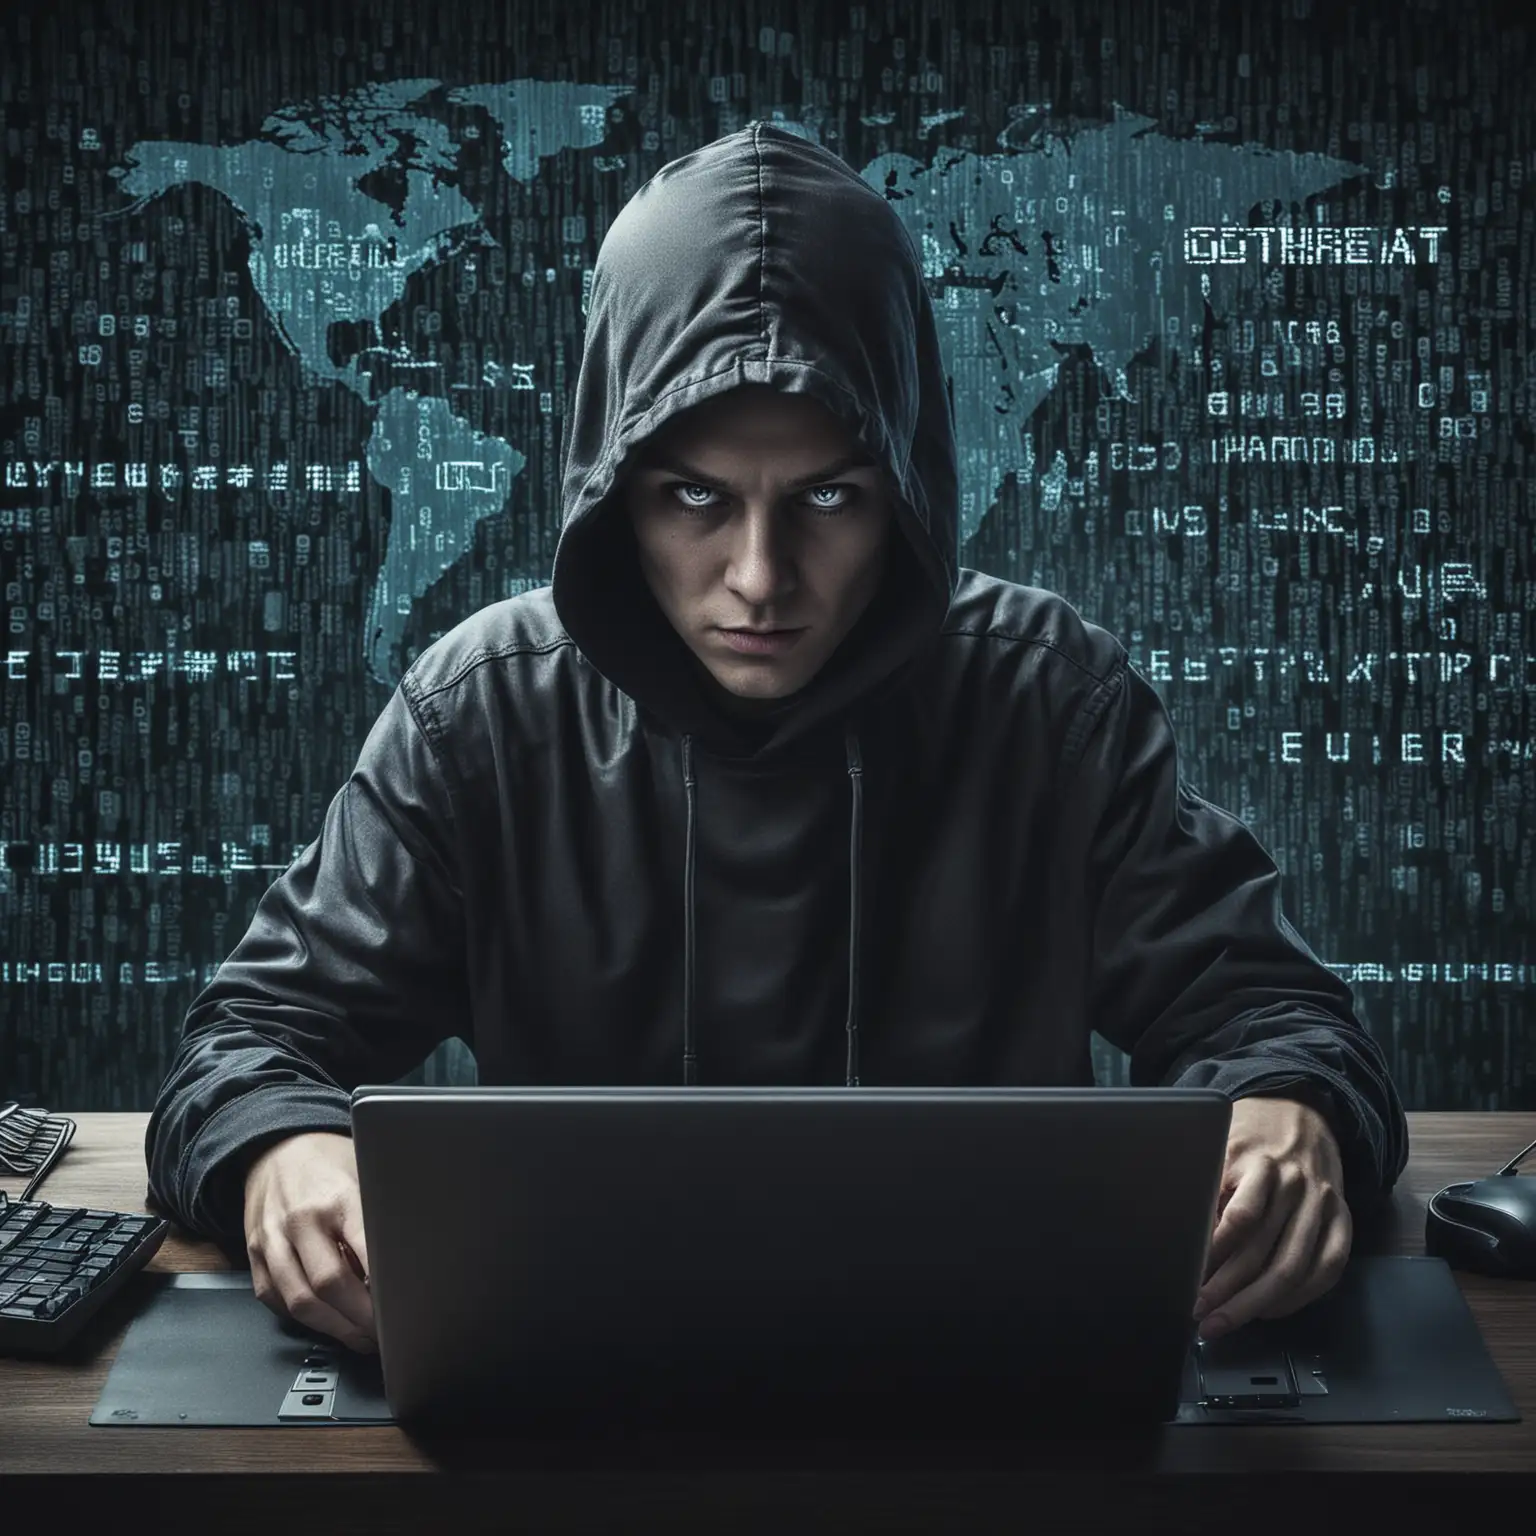 Cyber Threat Network Security Professional Analyzing Suspicious Activity